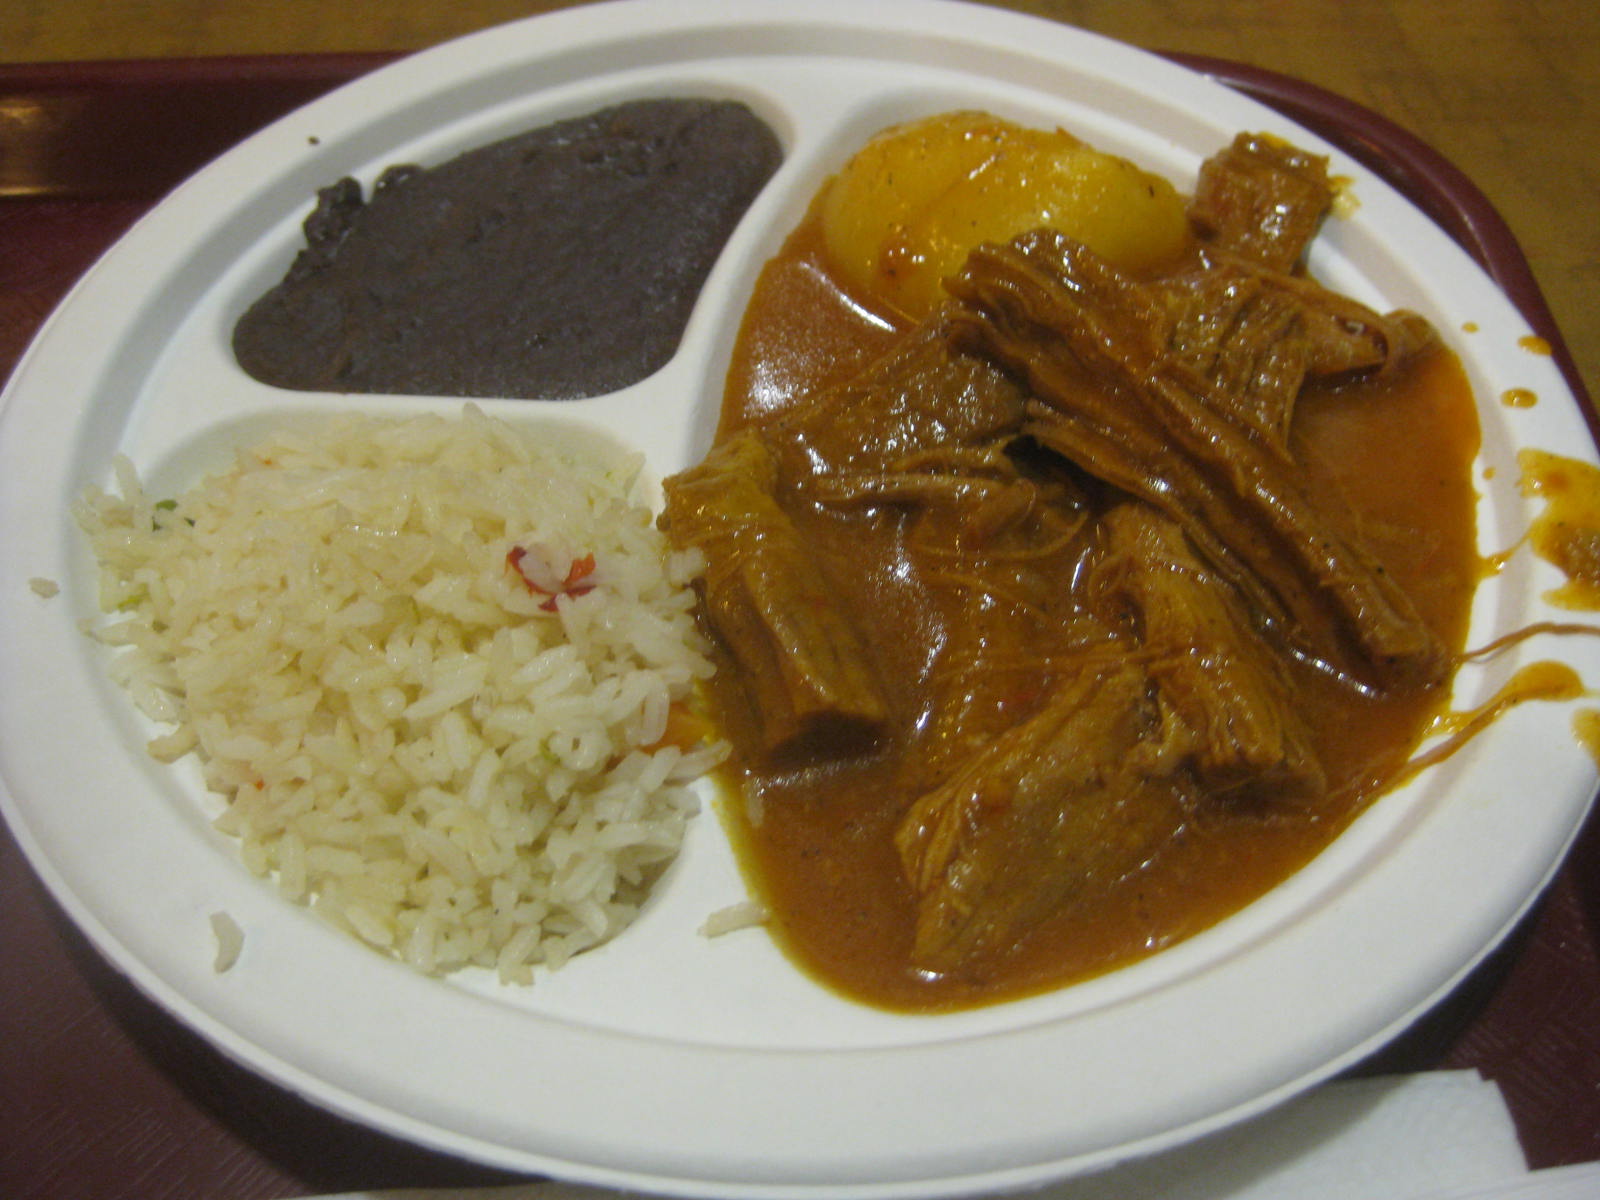 meat, rice, and curry are served on a plate